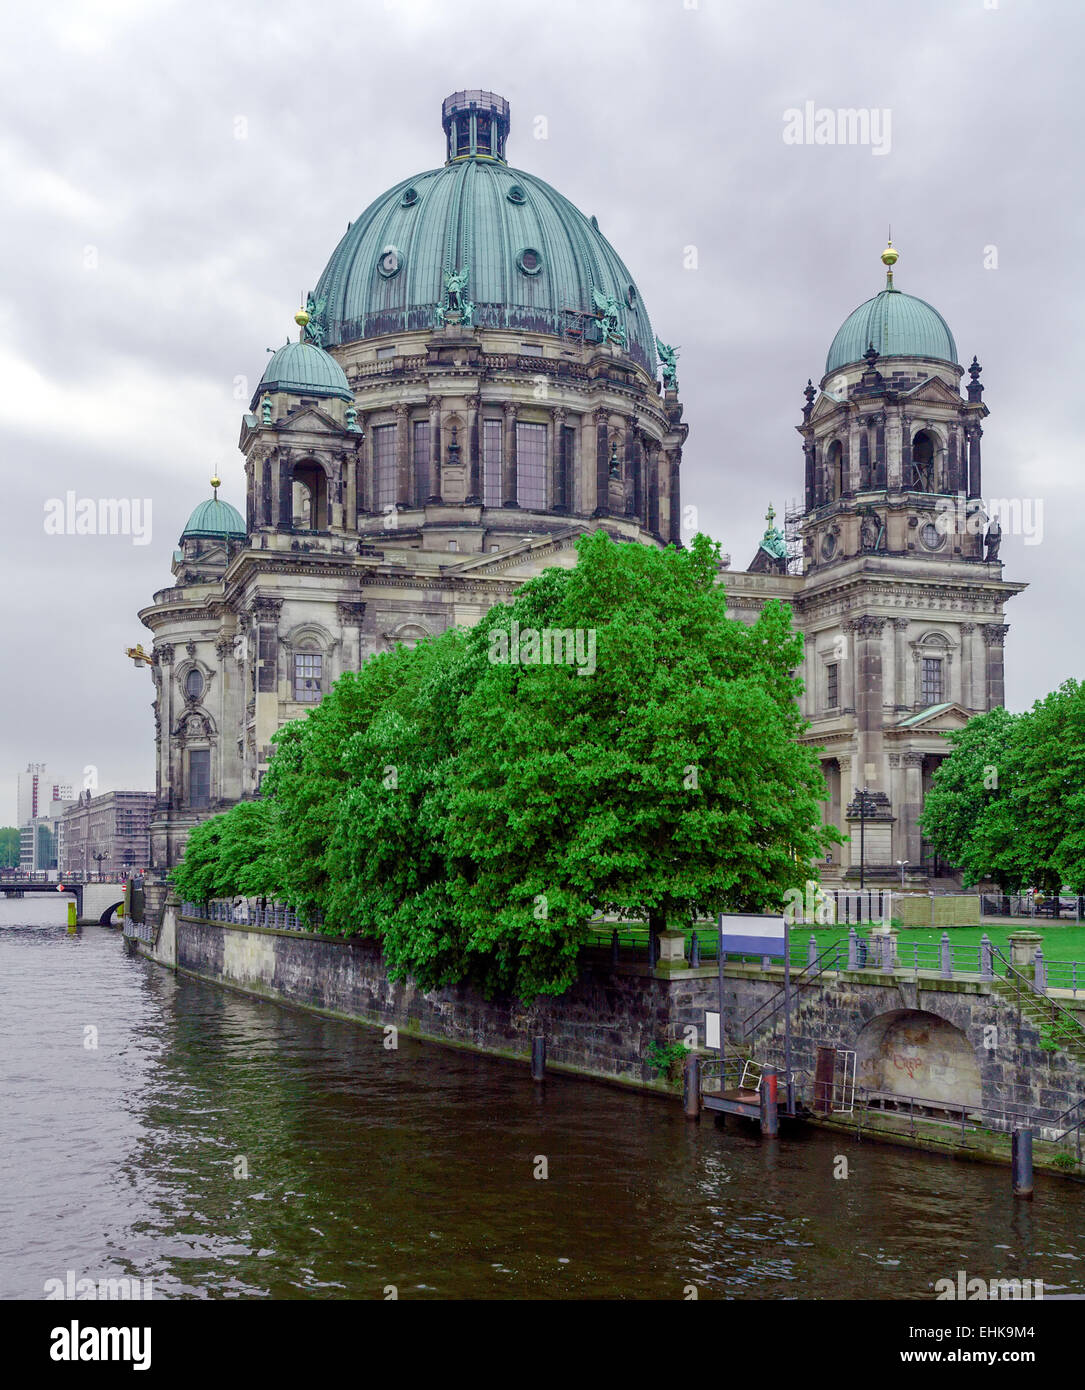 Berliner Dom (Berlin Cathedral) (1895-1905) designed by Julius Raschdorff and The Fernsehturm (TV tower) (1969) at Alexanderplat Stock Photo